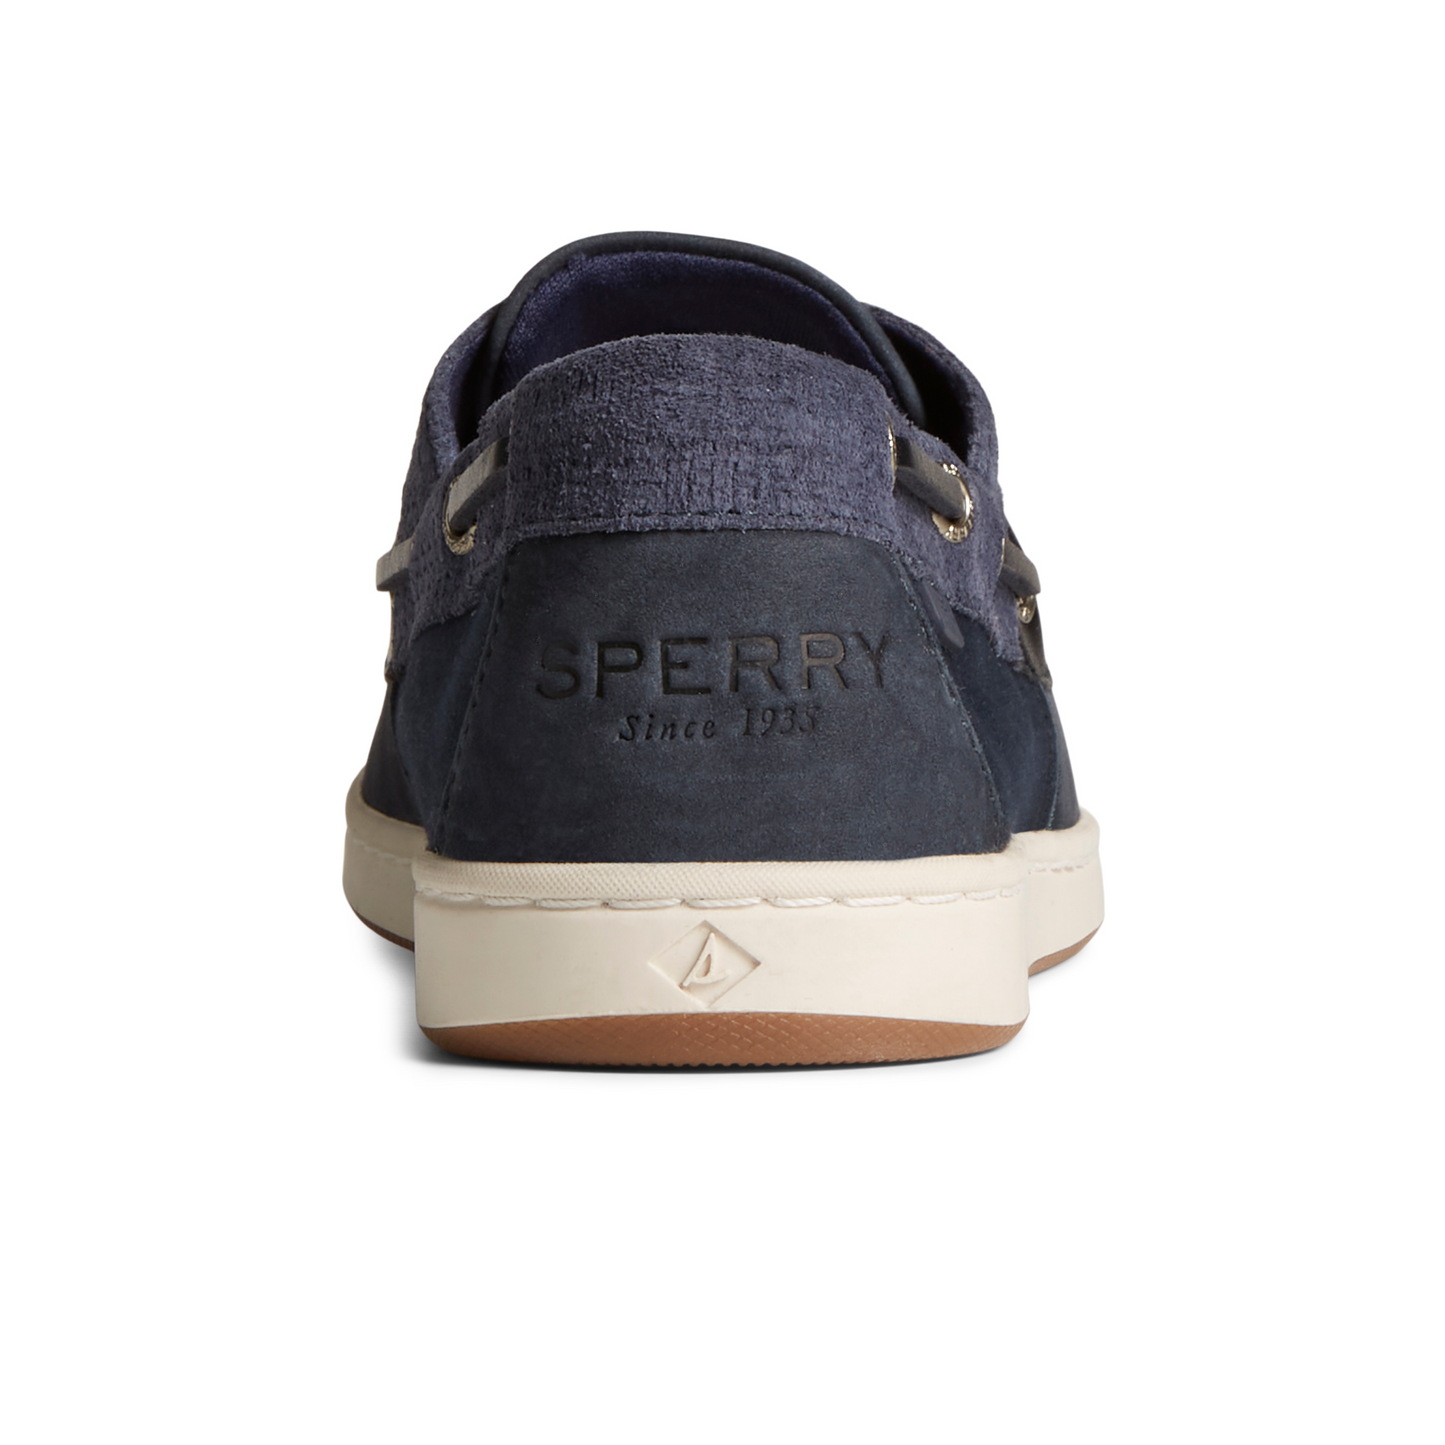 SPERRY Women's Coastfish Woven Boat Shoes - Navy (STS87627)